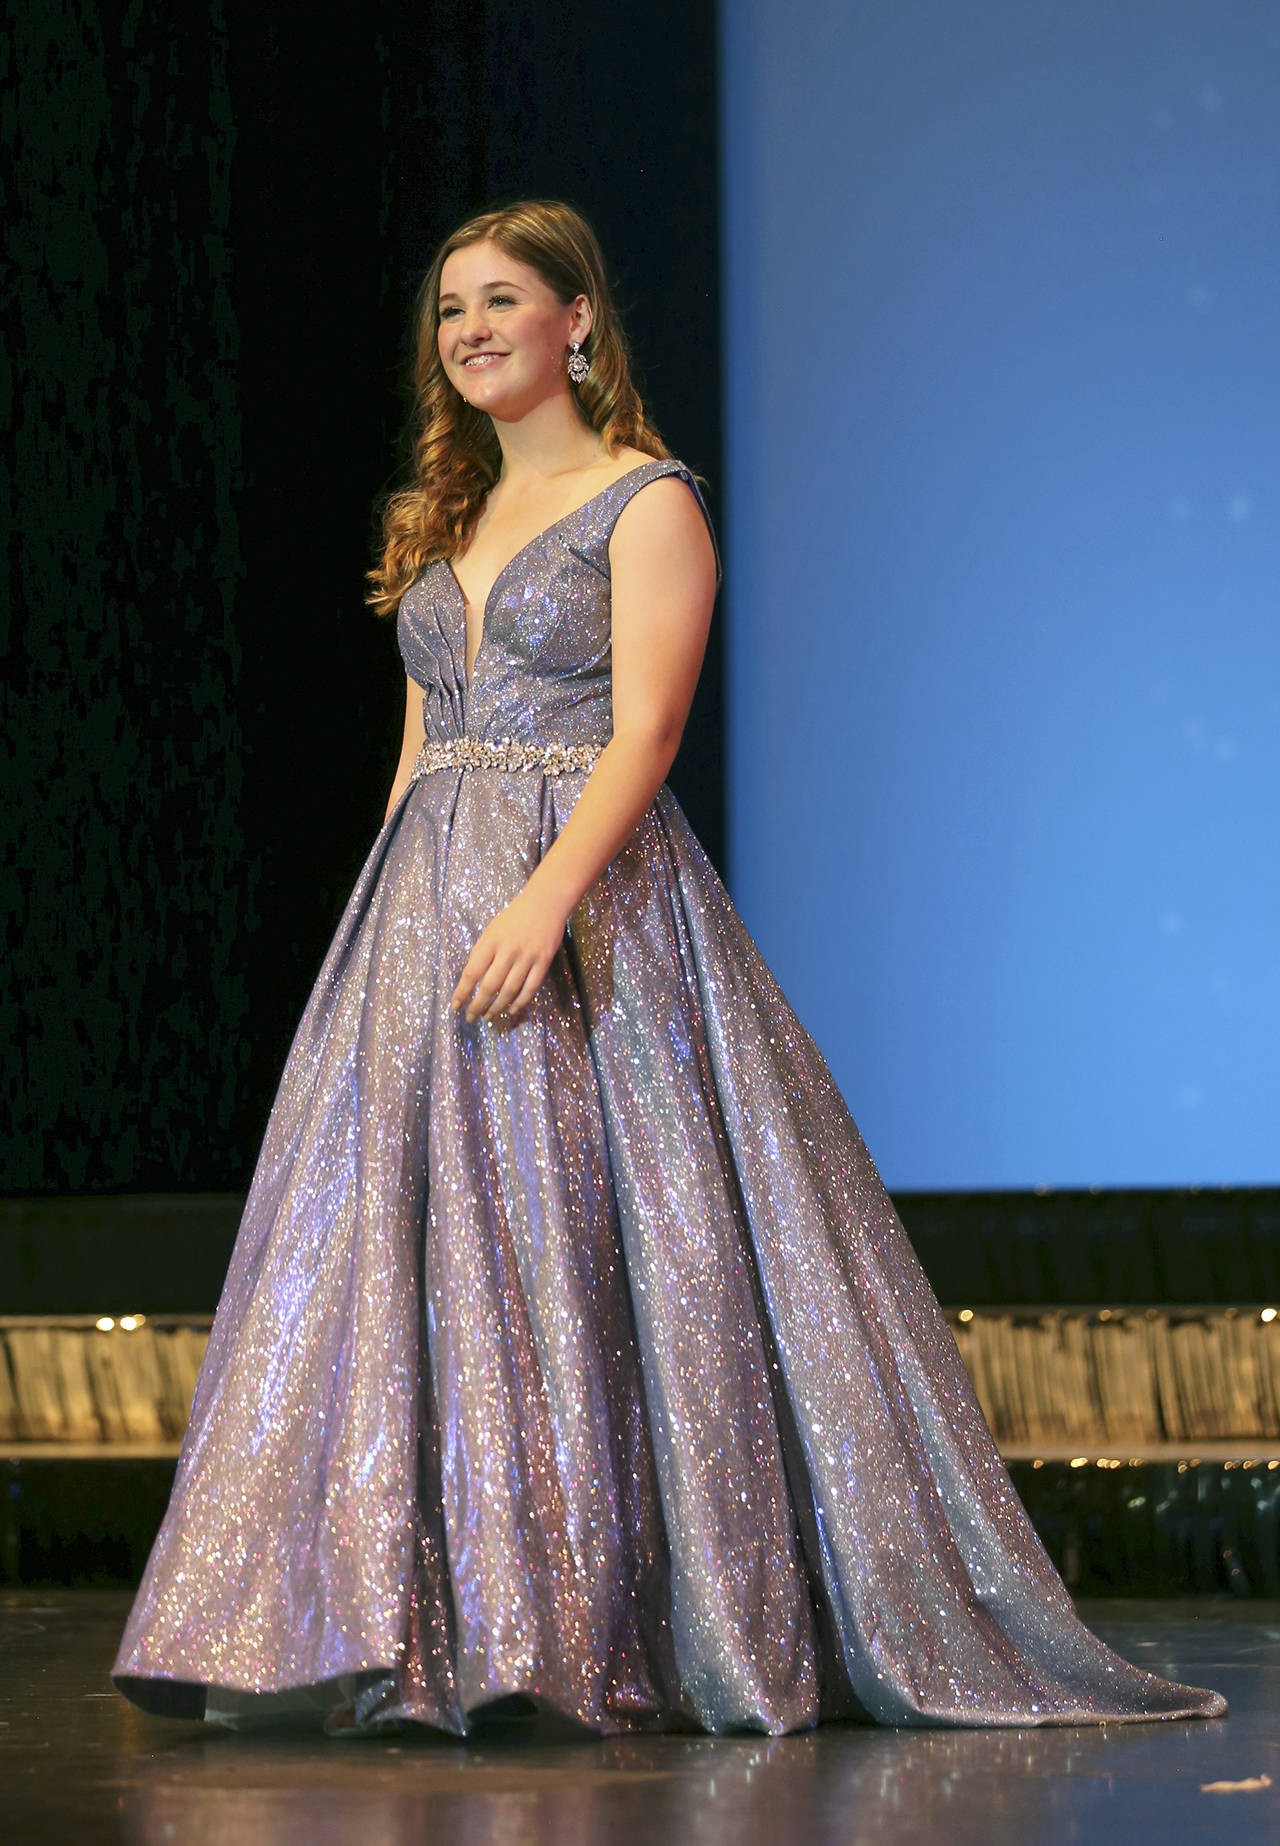 Kathryn Thomas, Grays Harbor’s Outstanding Teen, placed among the top 10 at the state pageant.